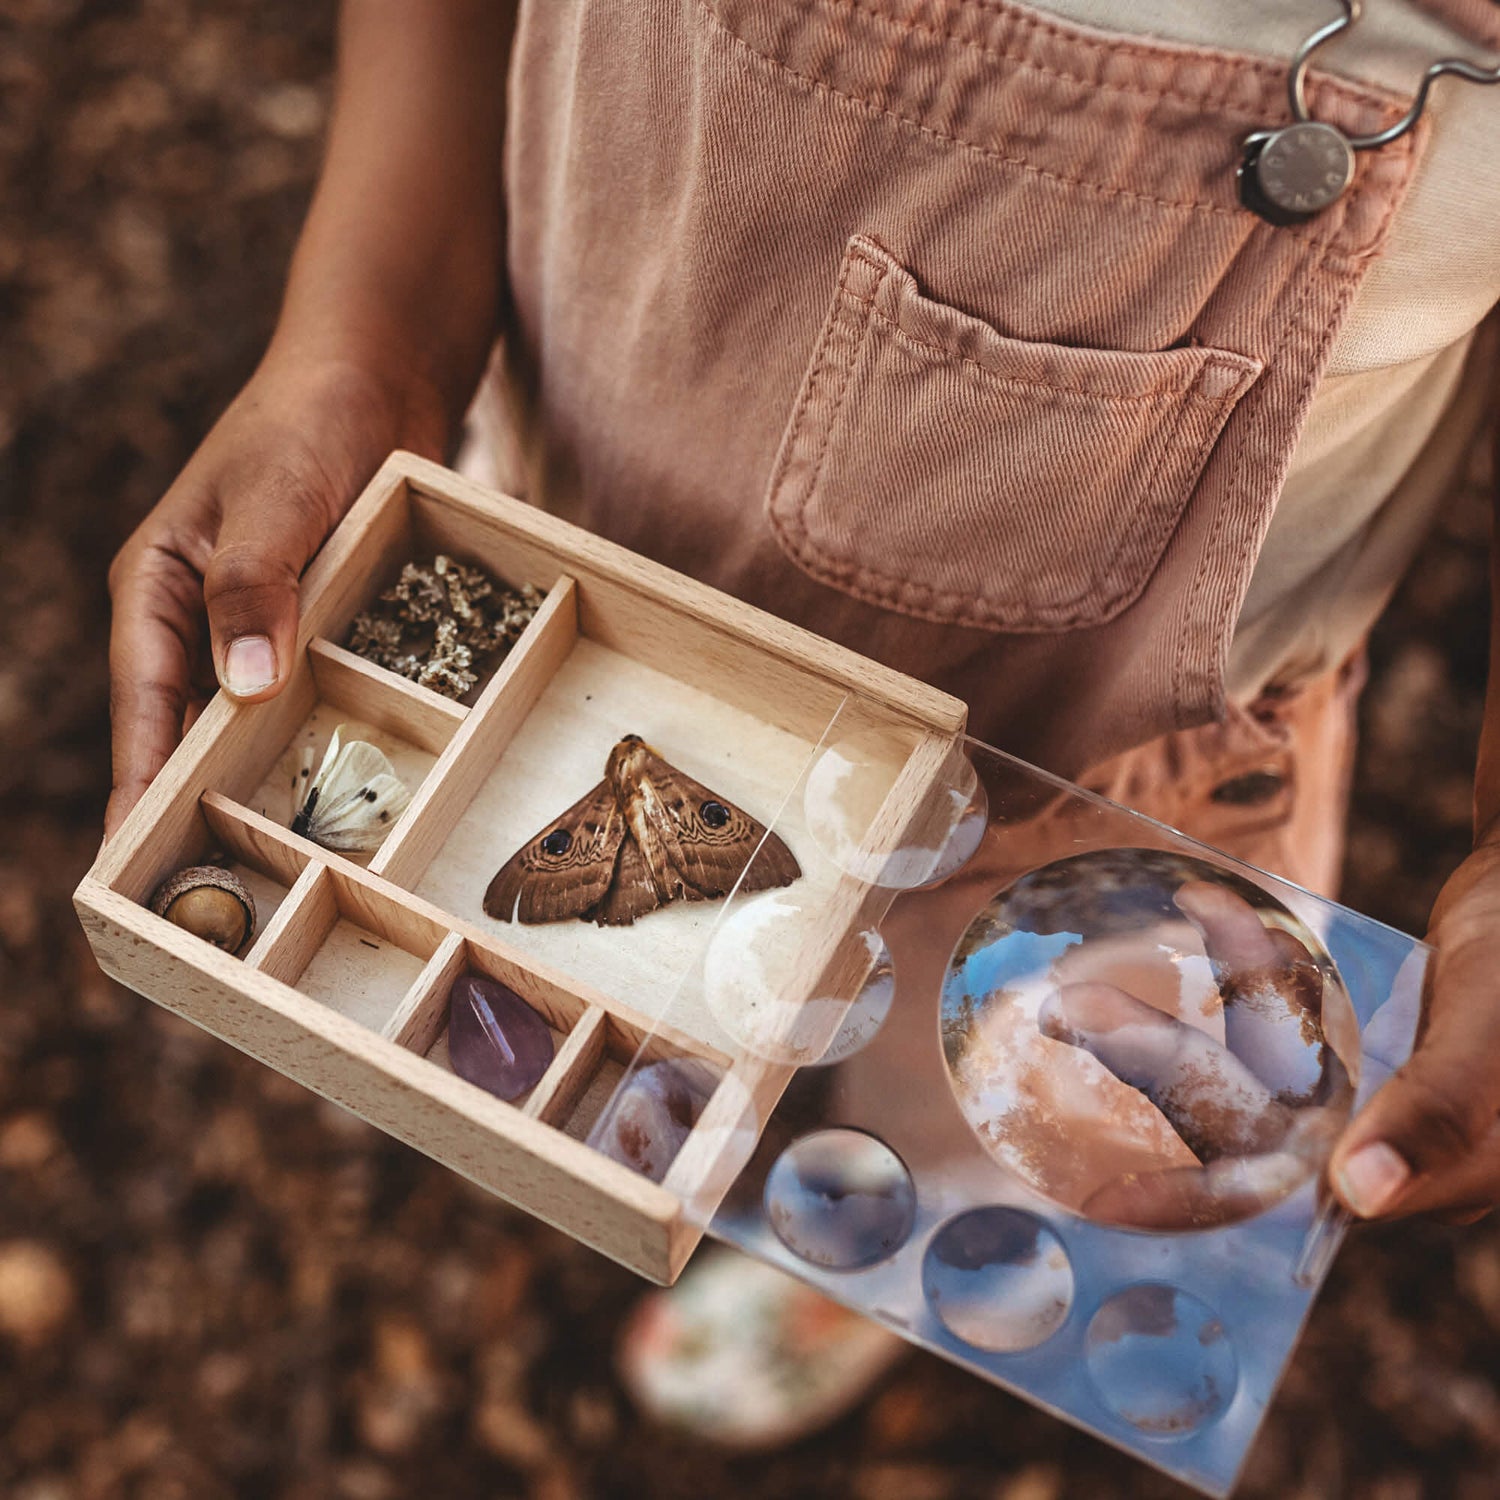 Girl holding Wooden bug box make by Kikkerland from Your Wild Books. Moth, flowers, acorn and crystal inside the wooden compartments with magnifying lenses.